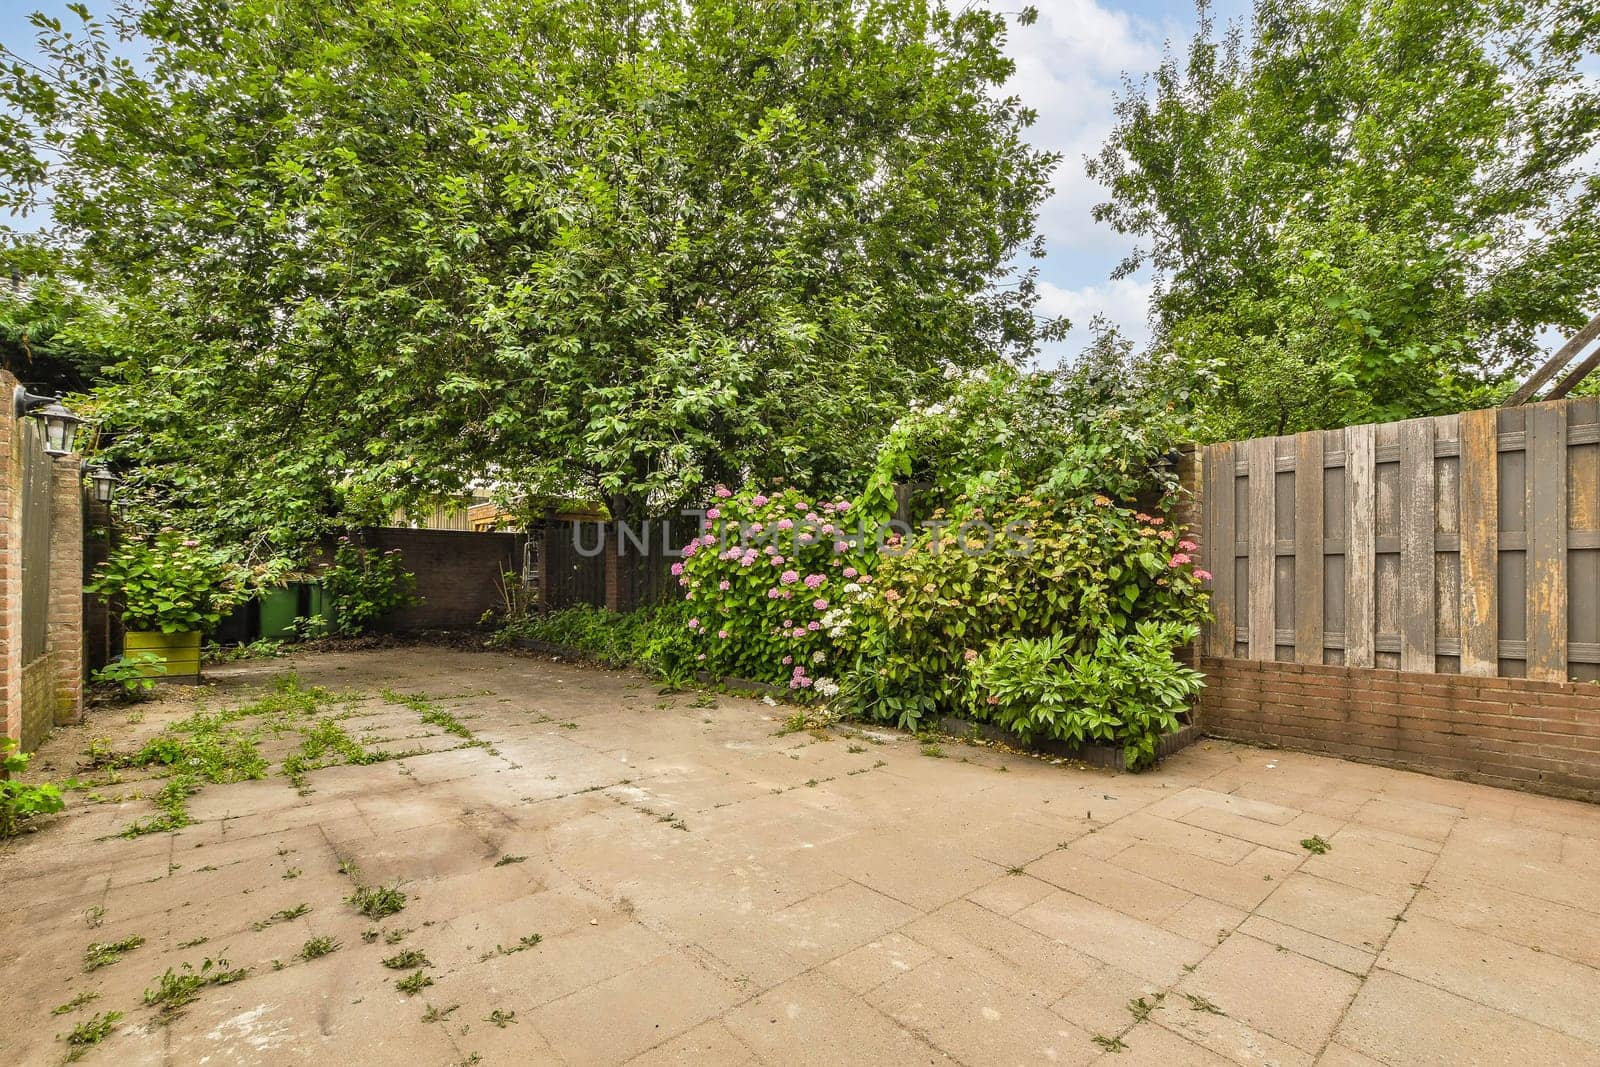 a backyard area with trees and flowers on the ground in front of an old brick fenced yard, surrounded by green foliage